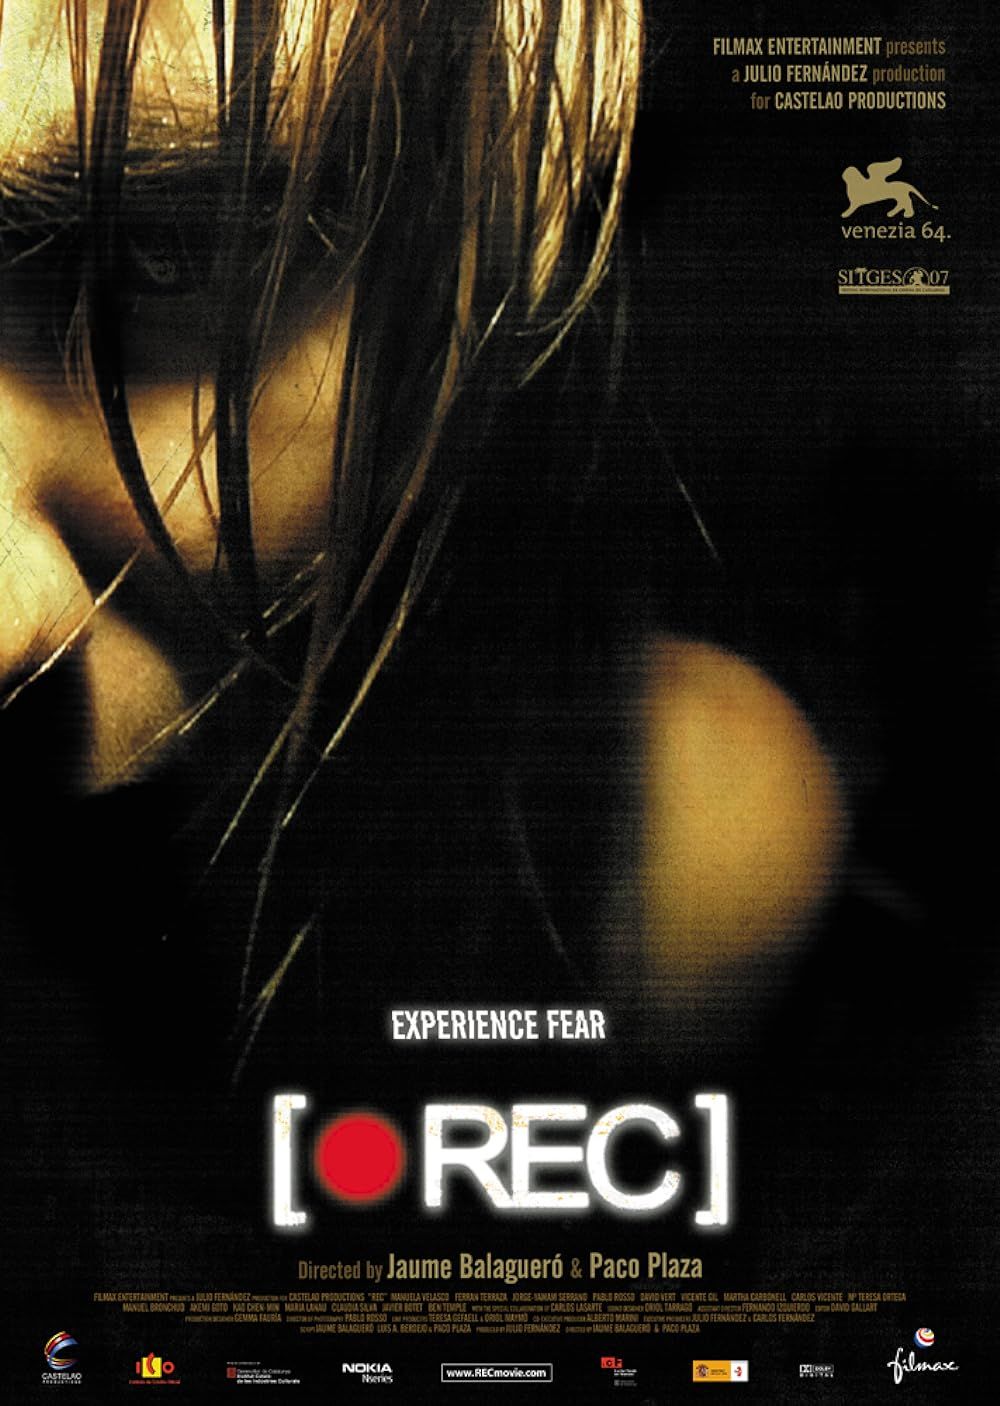 Angela stares at the camera on the cover of REC 2007